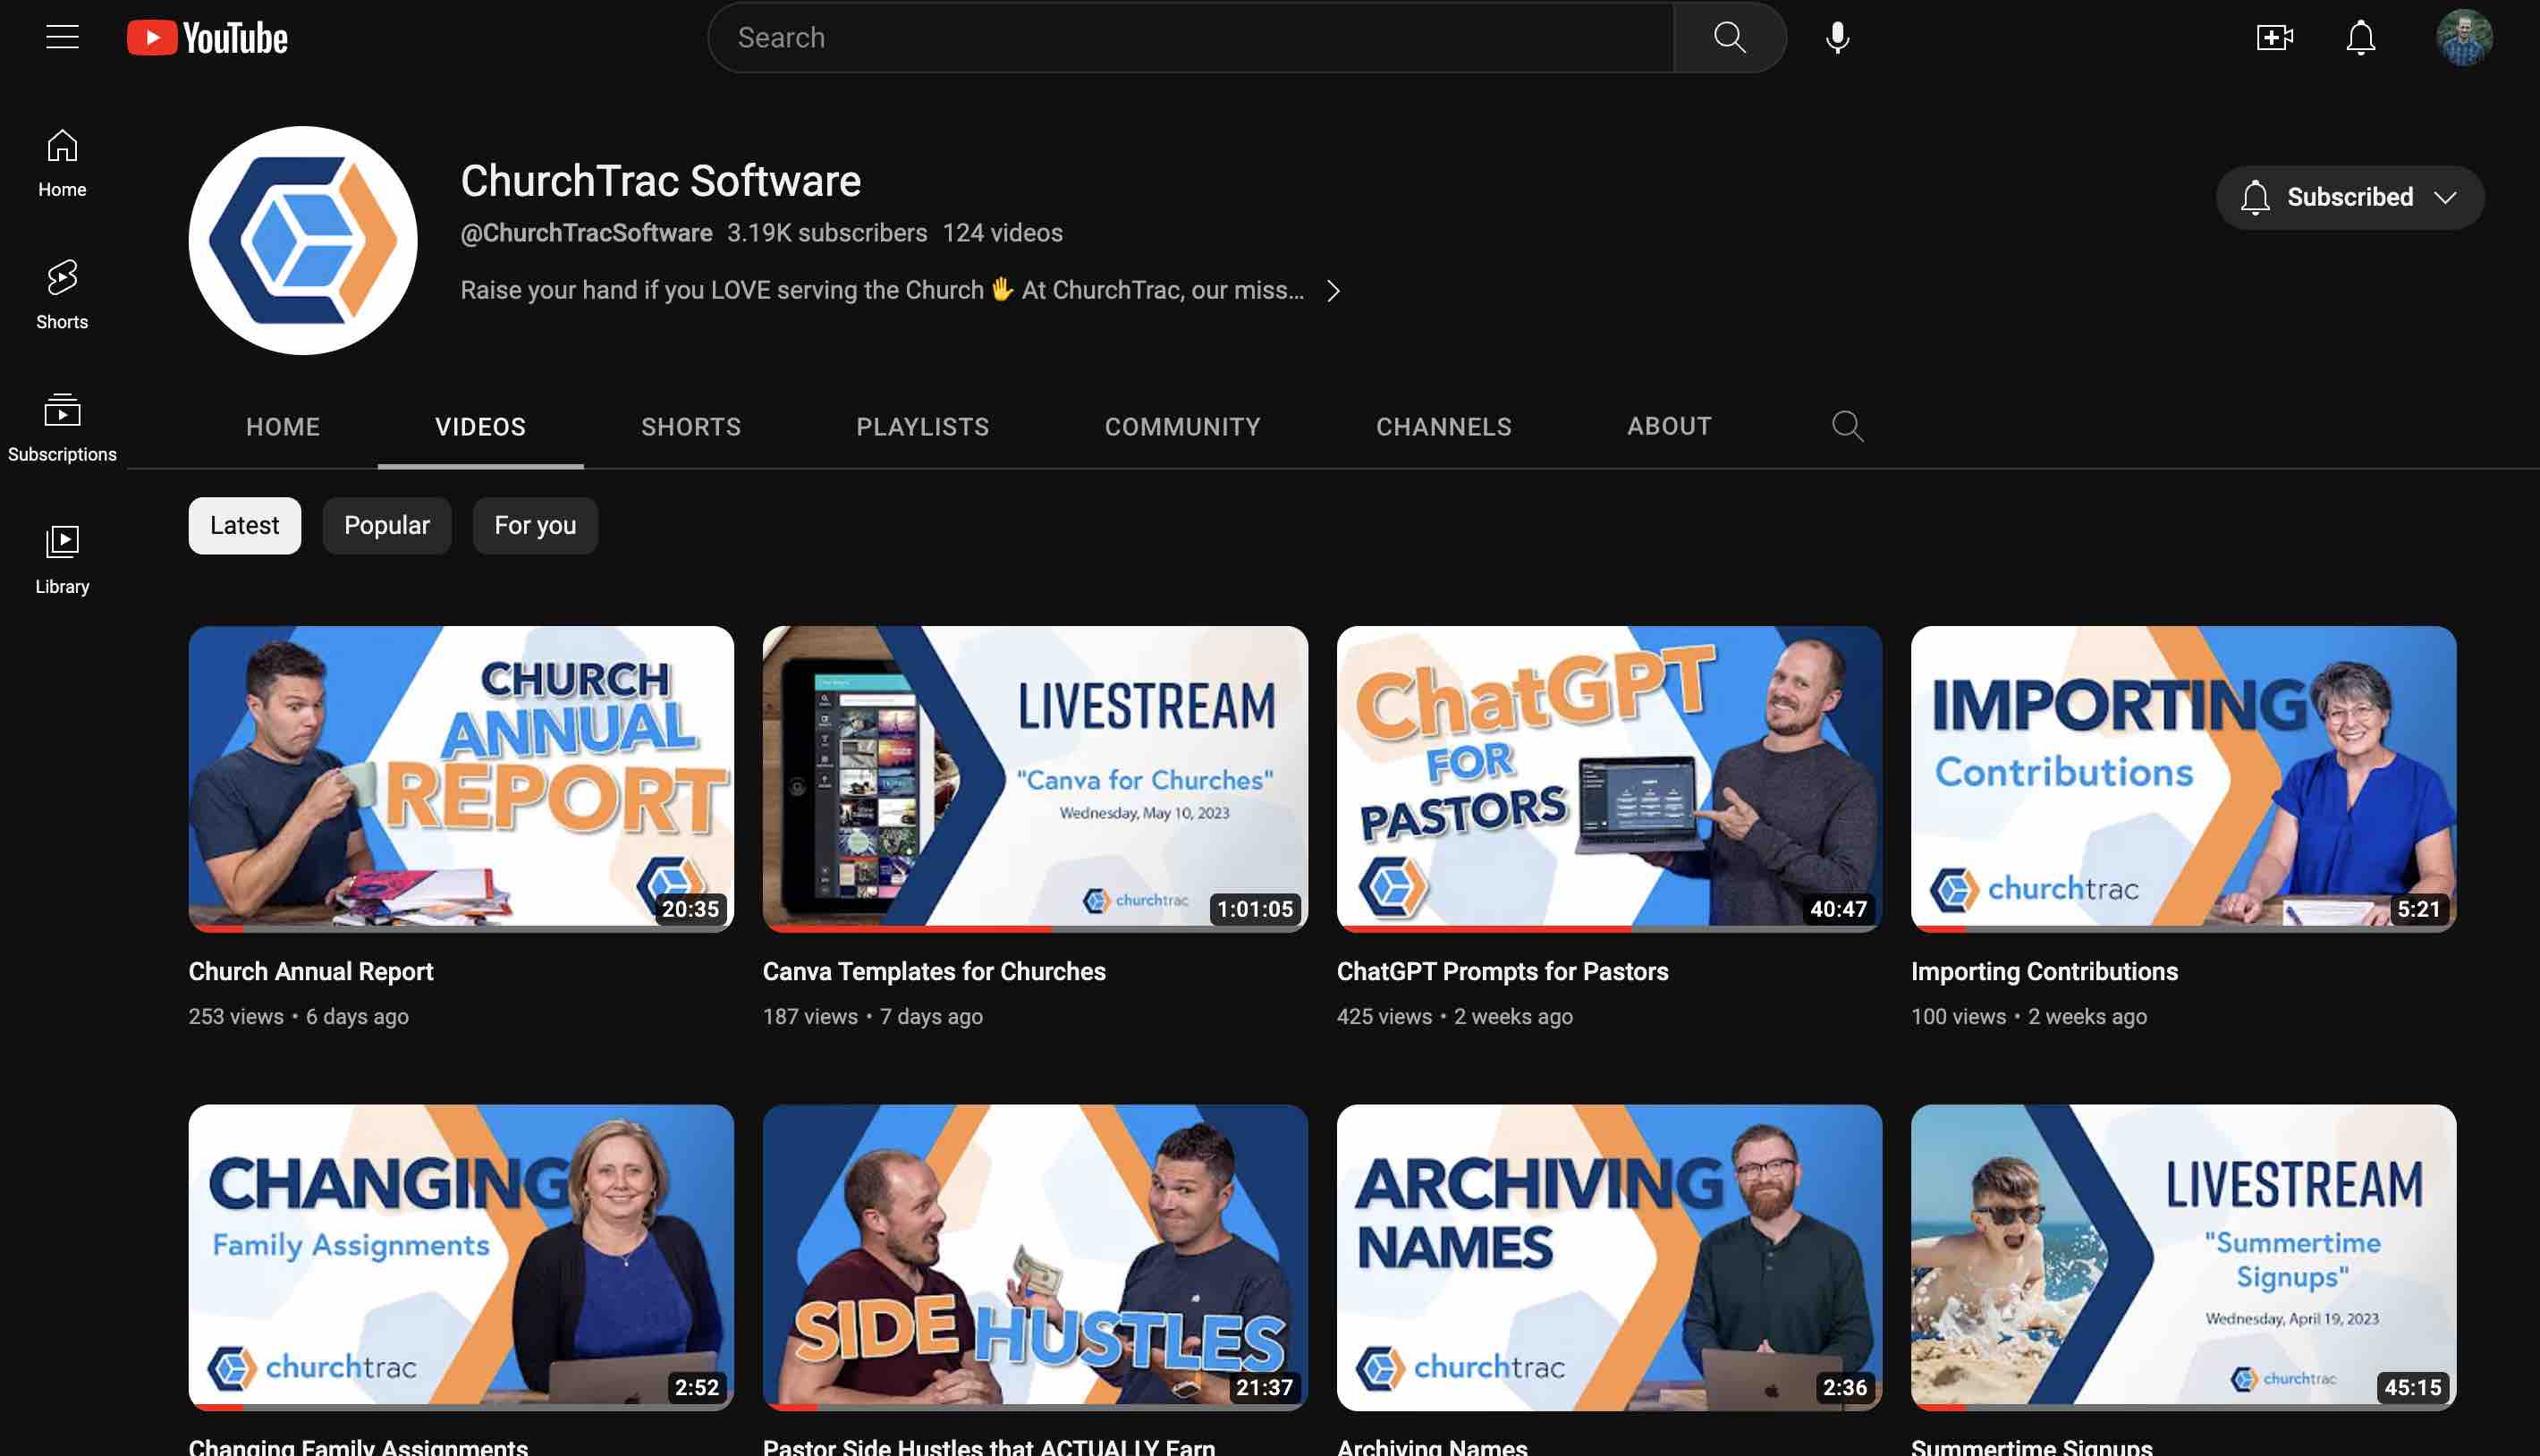 ChurchTrac has an awesome Youtube channel. Servant Keeper does not update their community.